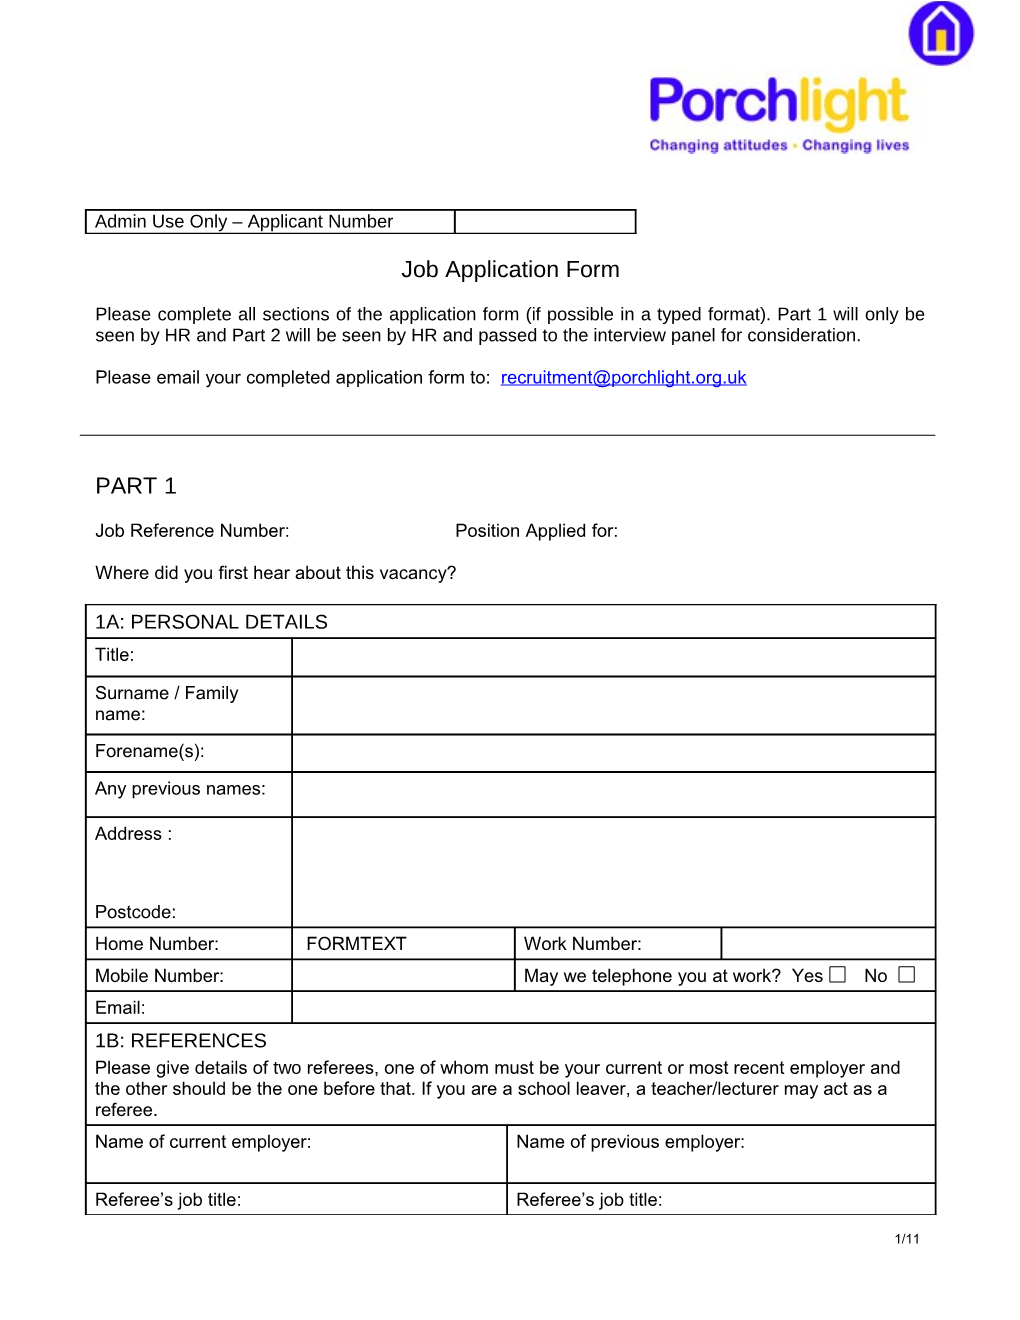 Please Fill in All Sections of the Application Form